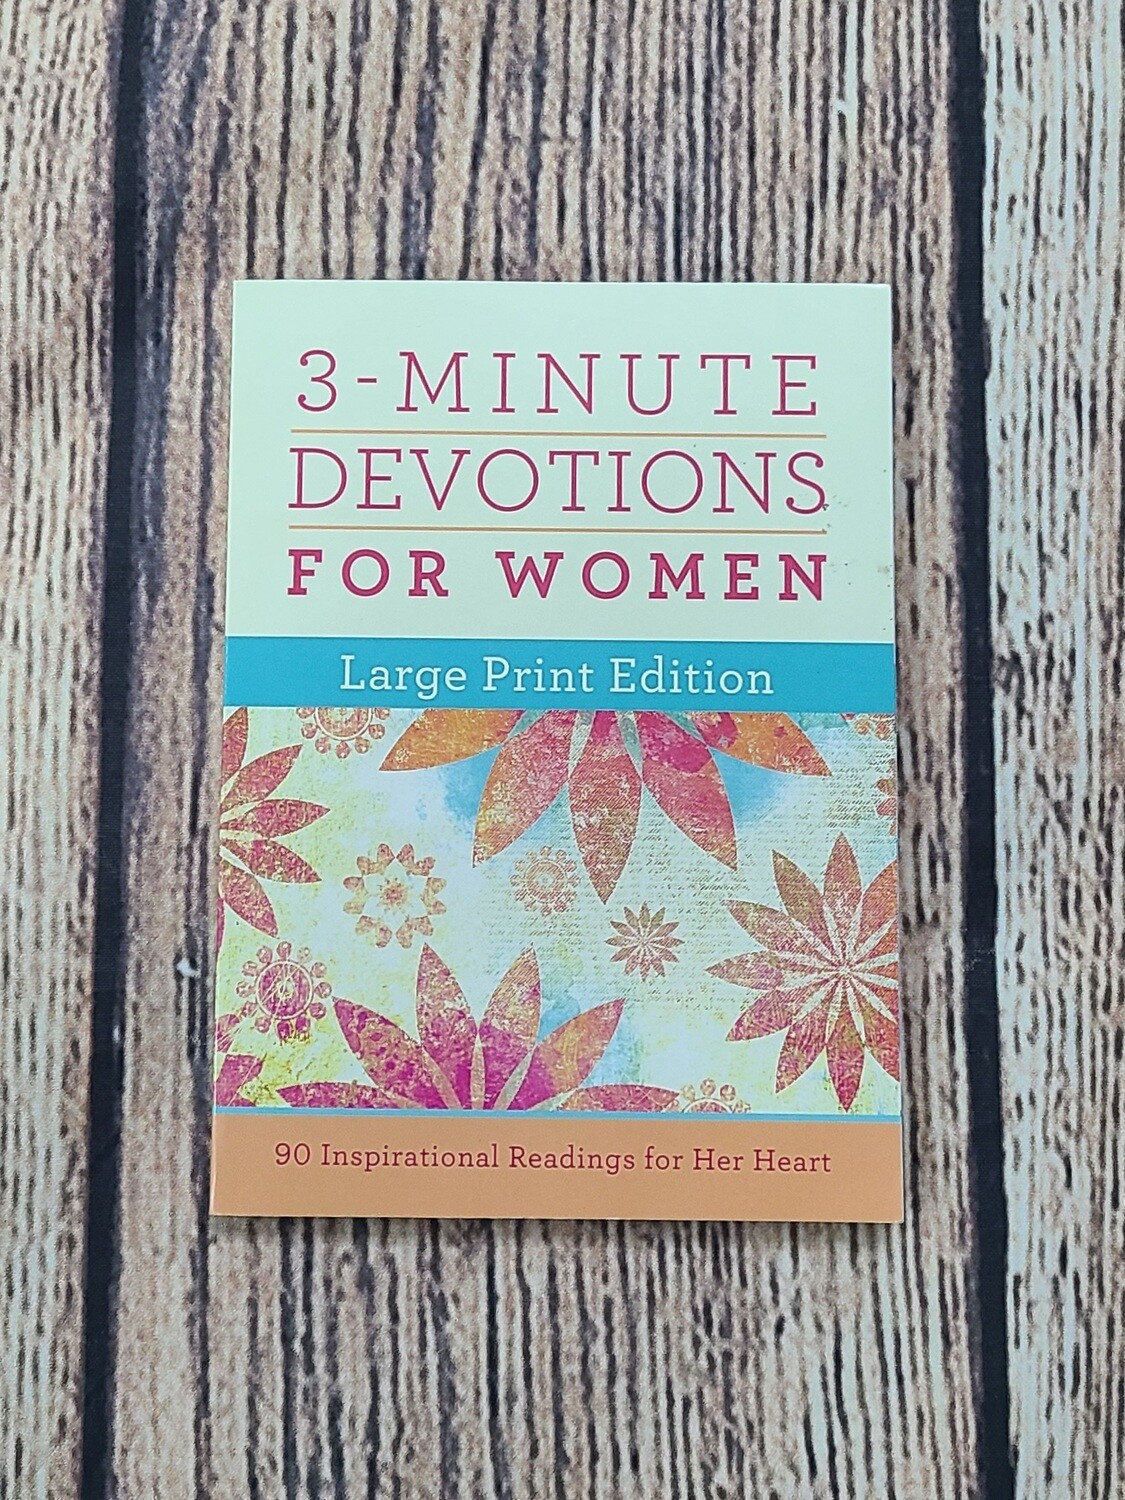 3-Minute Devotions for Women: Large Print Edition: 90 Inspirational Readings for Her Heart by Barbour Publishing - Great Condition